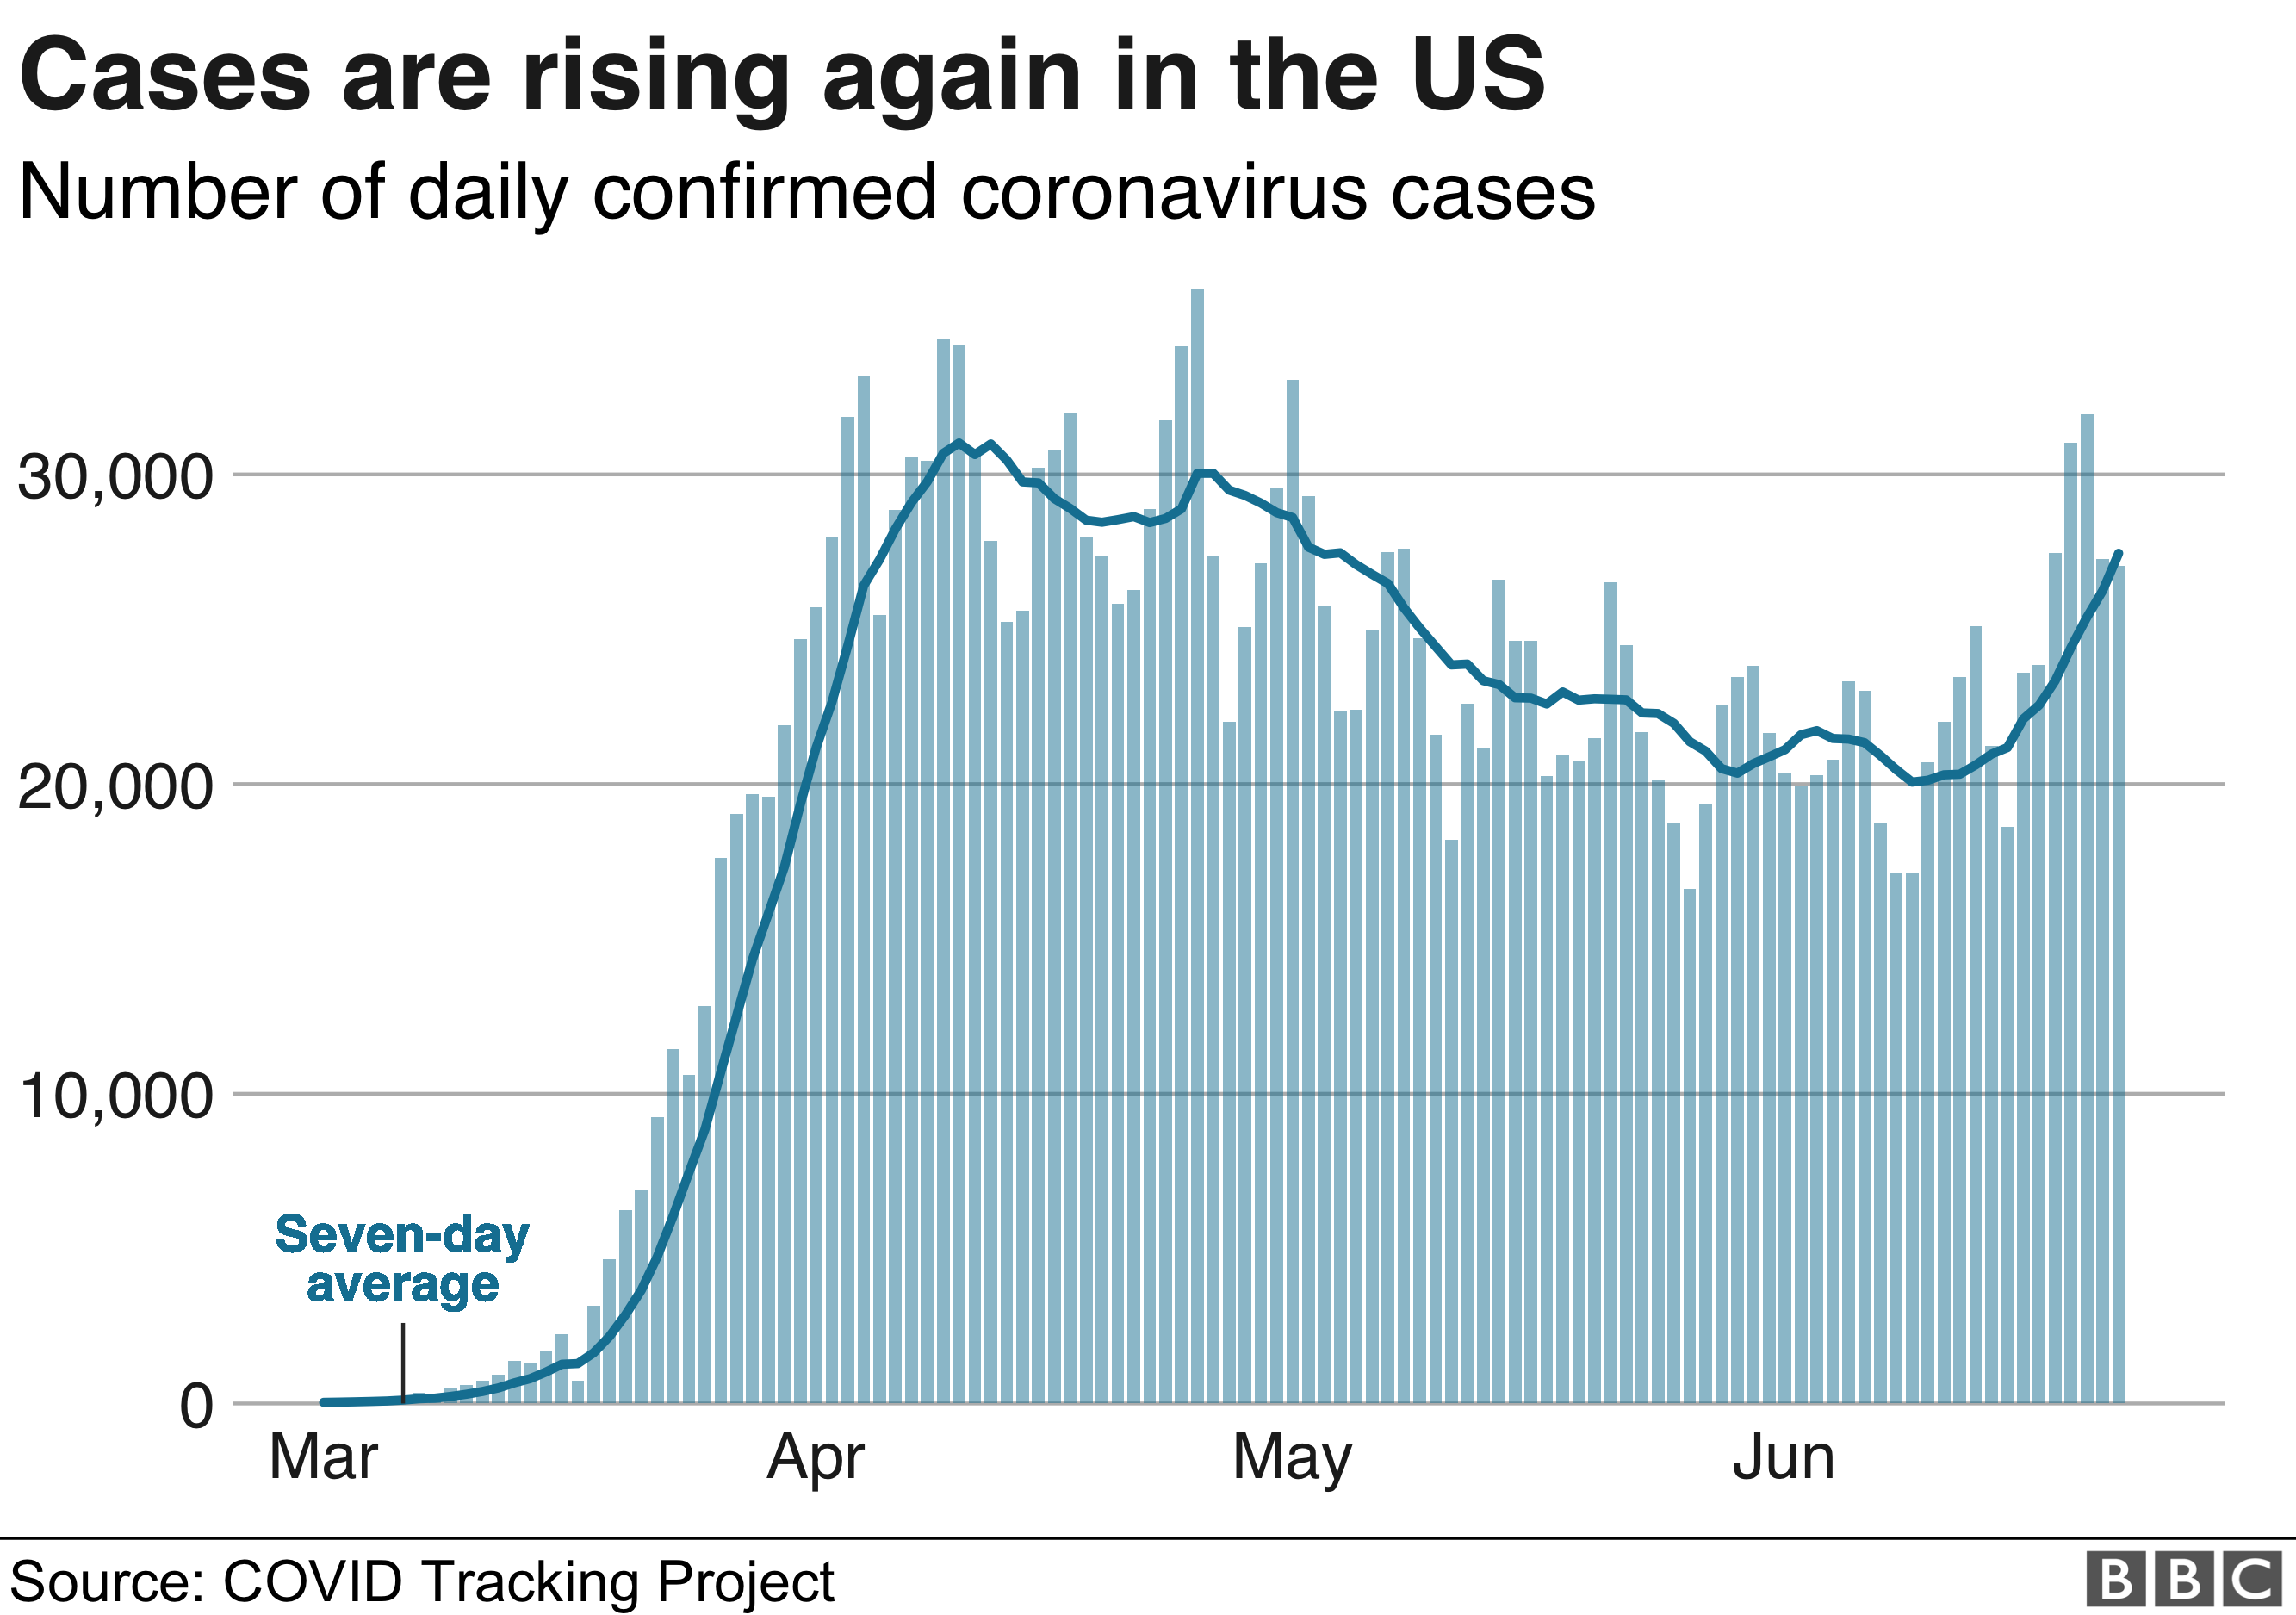 Graphicshows cases rising in the US